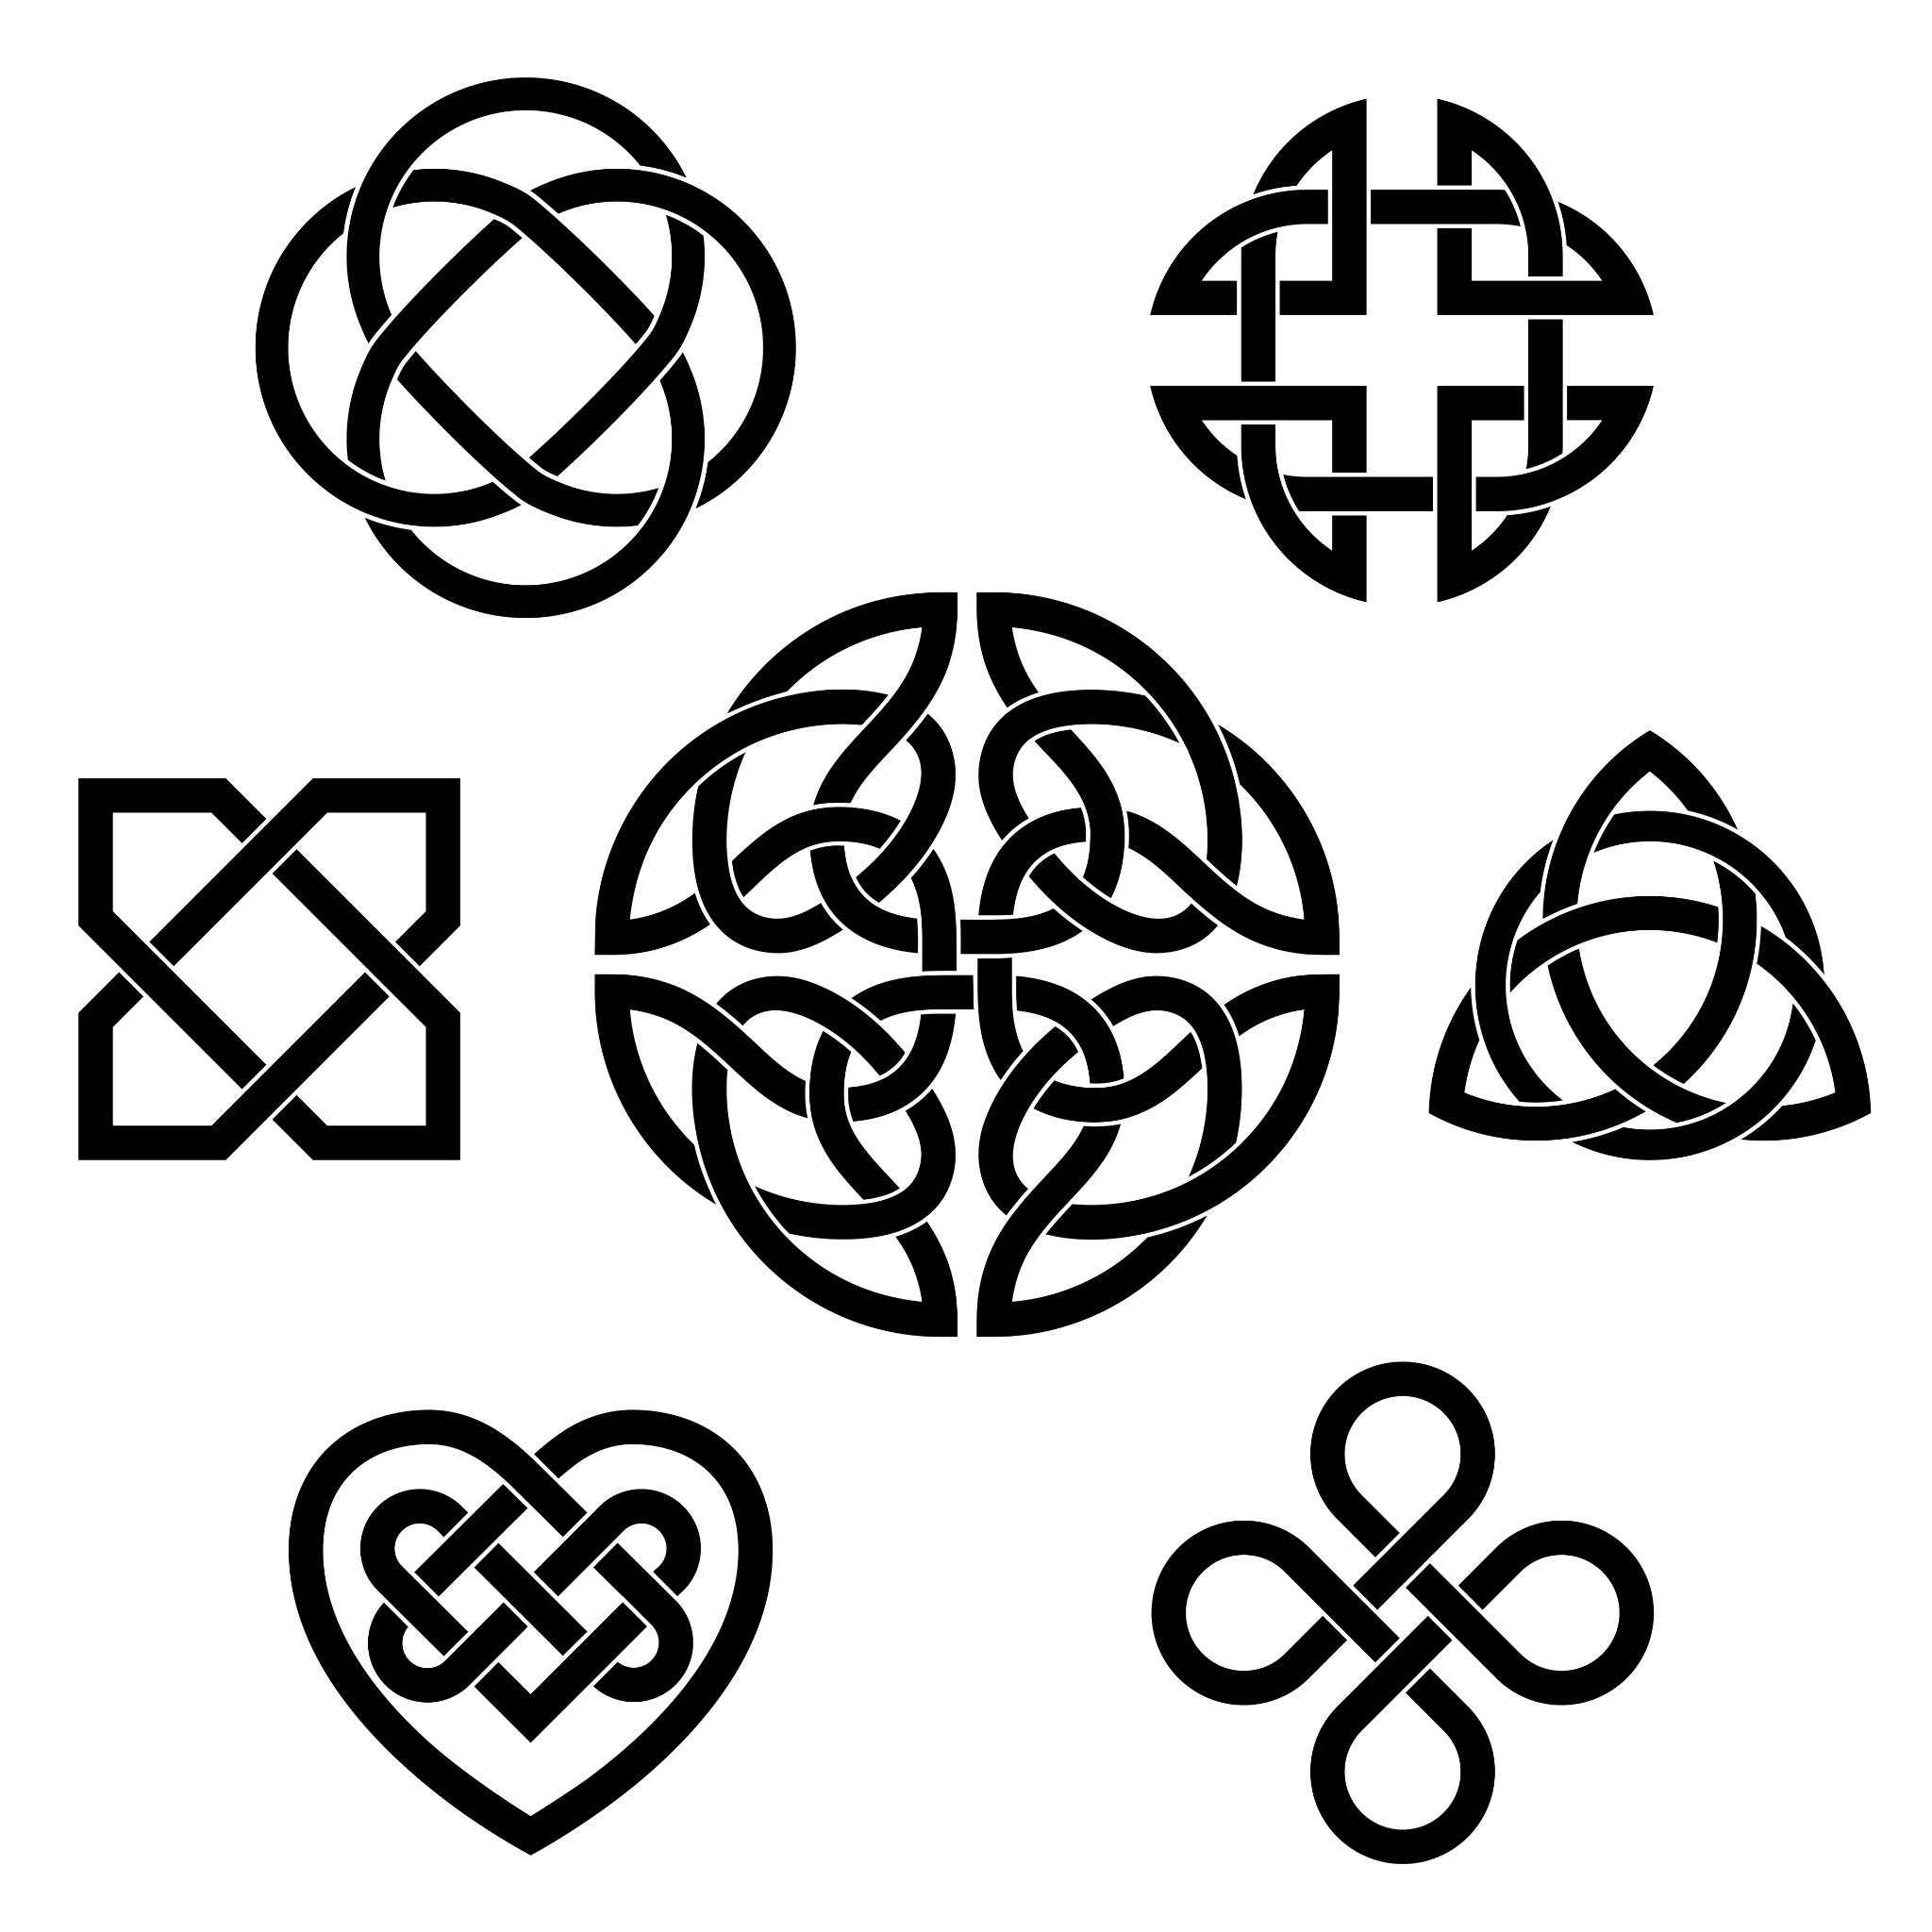 Learn More About the Celtic Knot Meaning